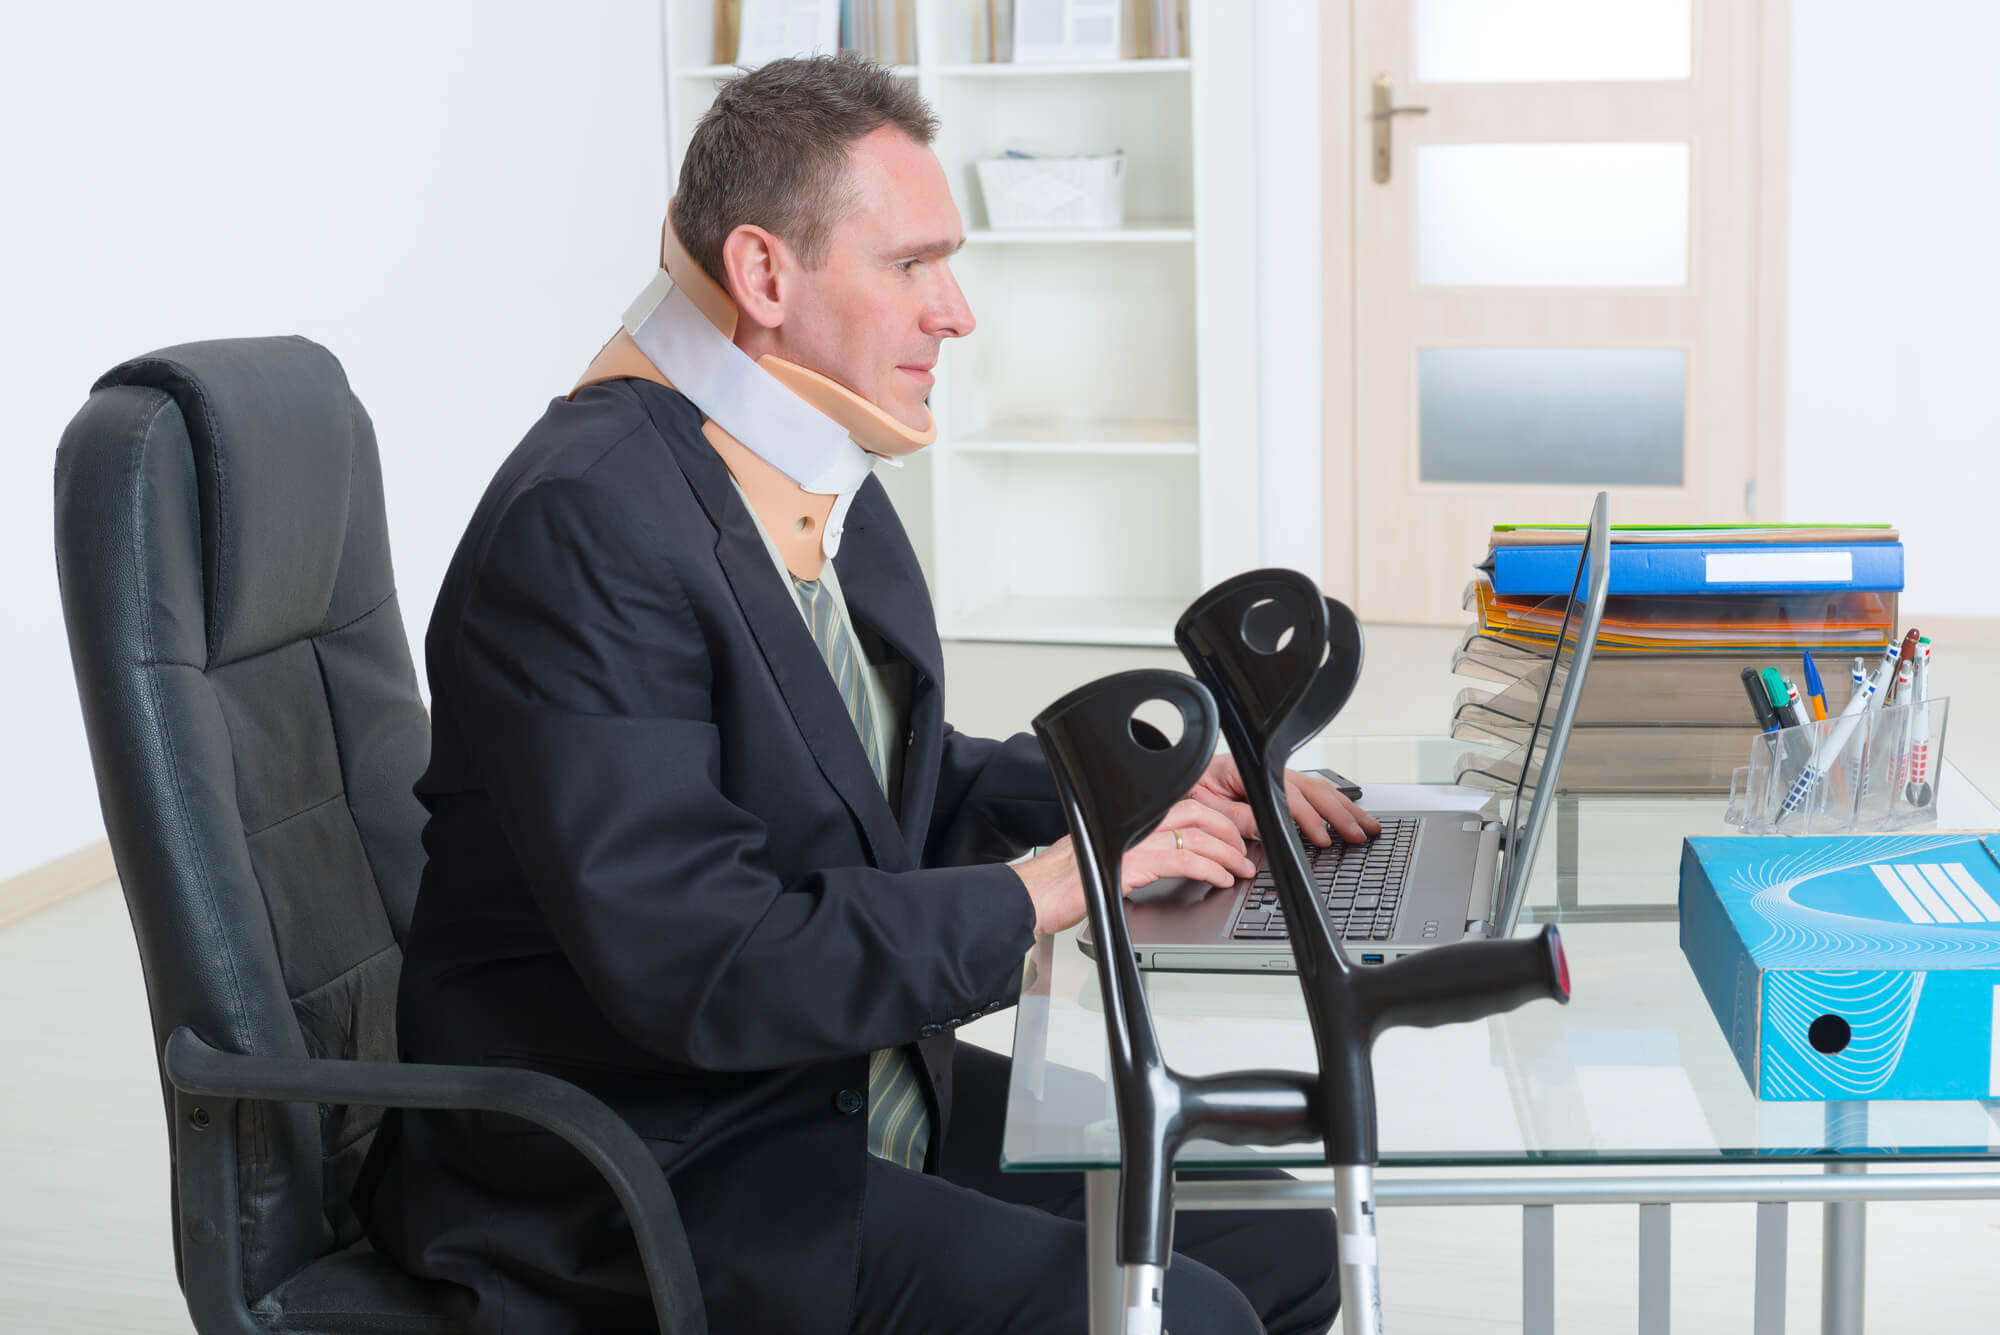 An individual wearing a neck brace and a dark suit is sitting at a desk working on a laptop, with a pair of crutches leaning against the desk nearby.